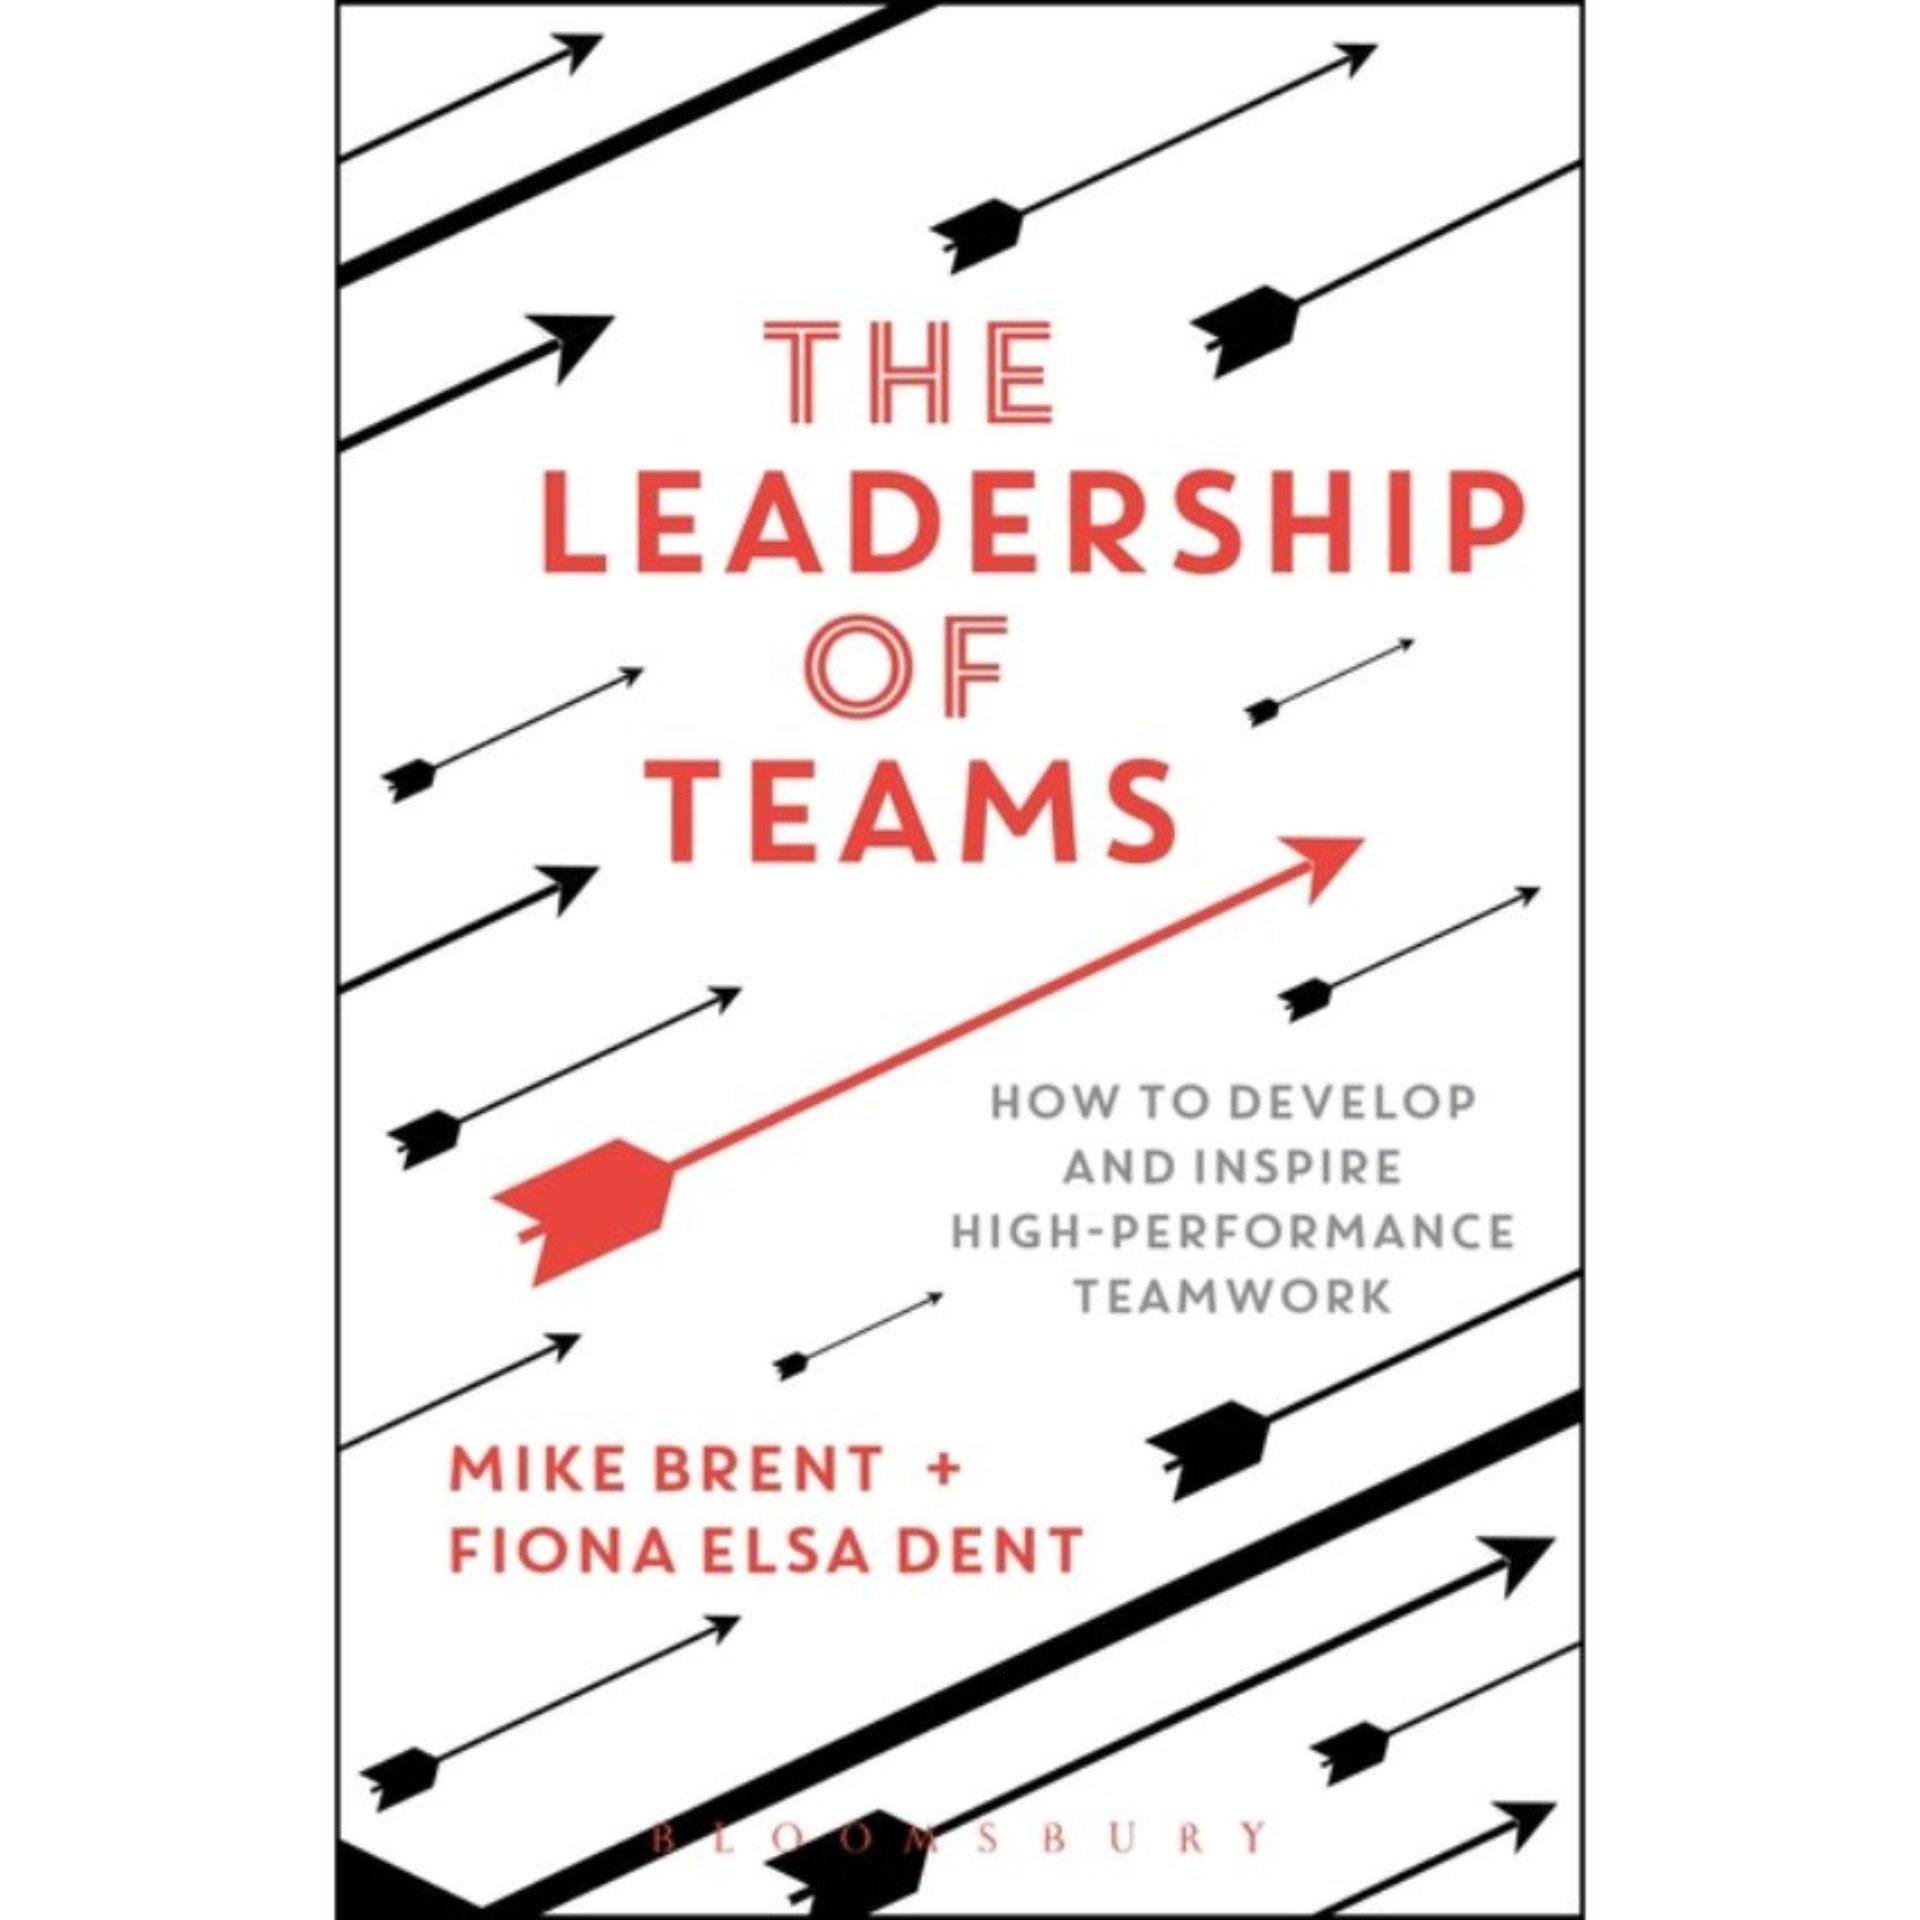 The Leadership of Teams: How to Develop and Inspire High-performance Teamwork by Mike Brent & Fiona Elsa Dent - Book A Book